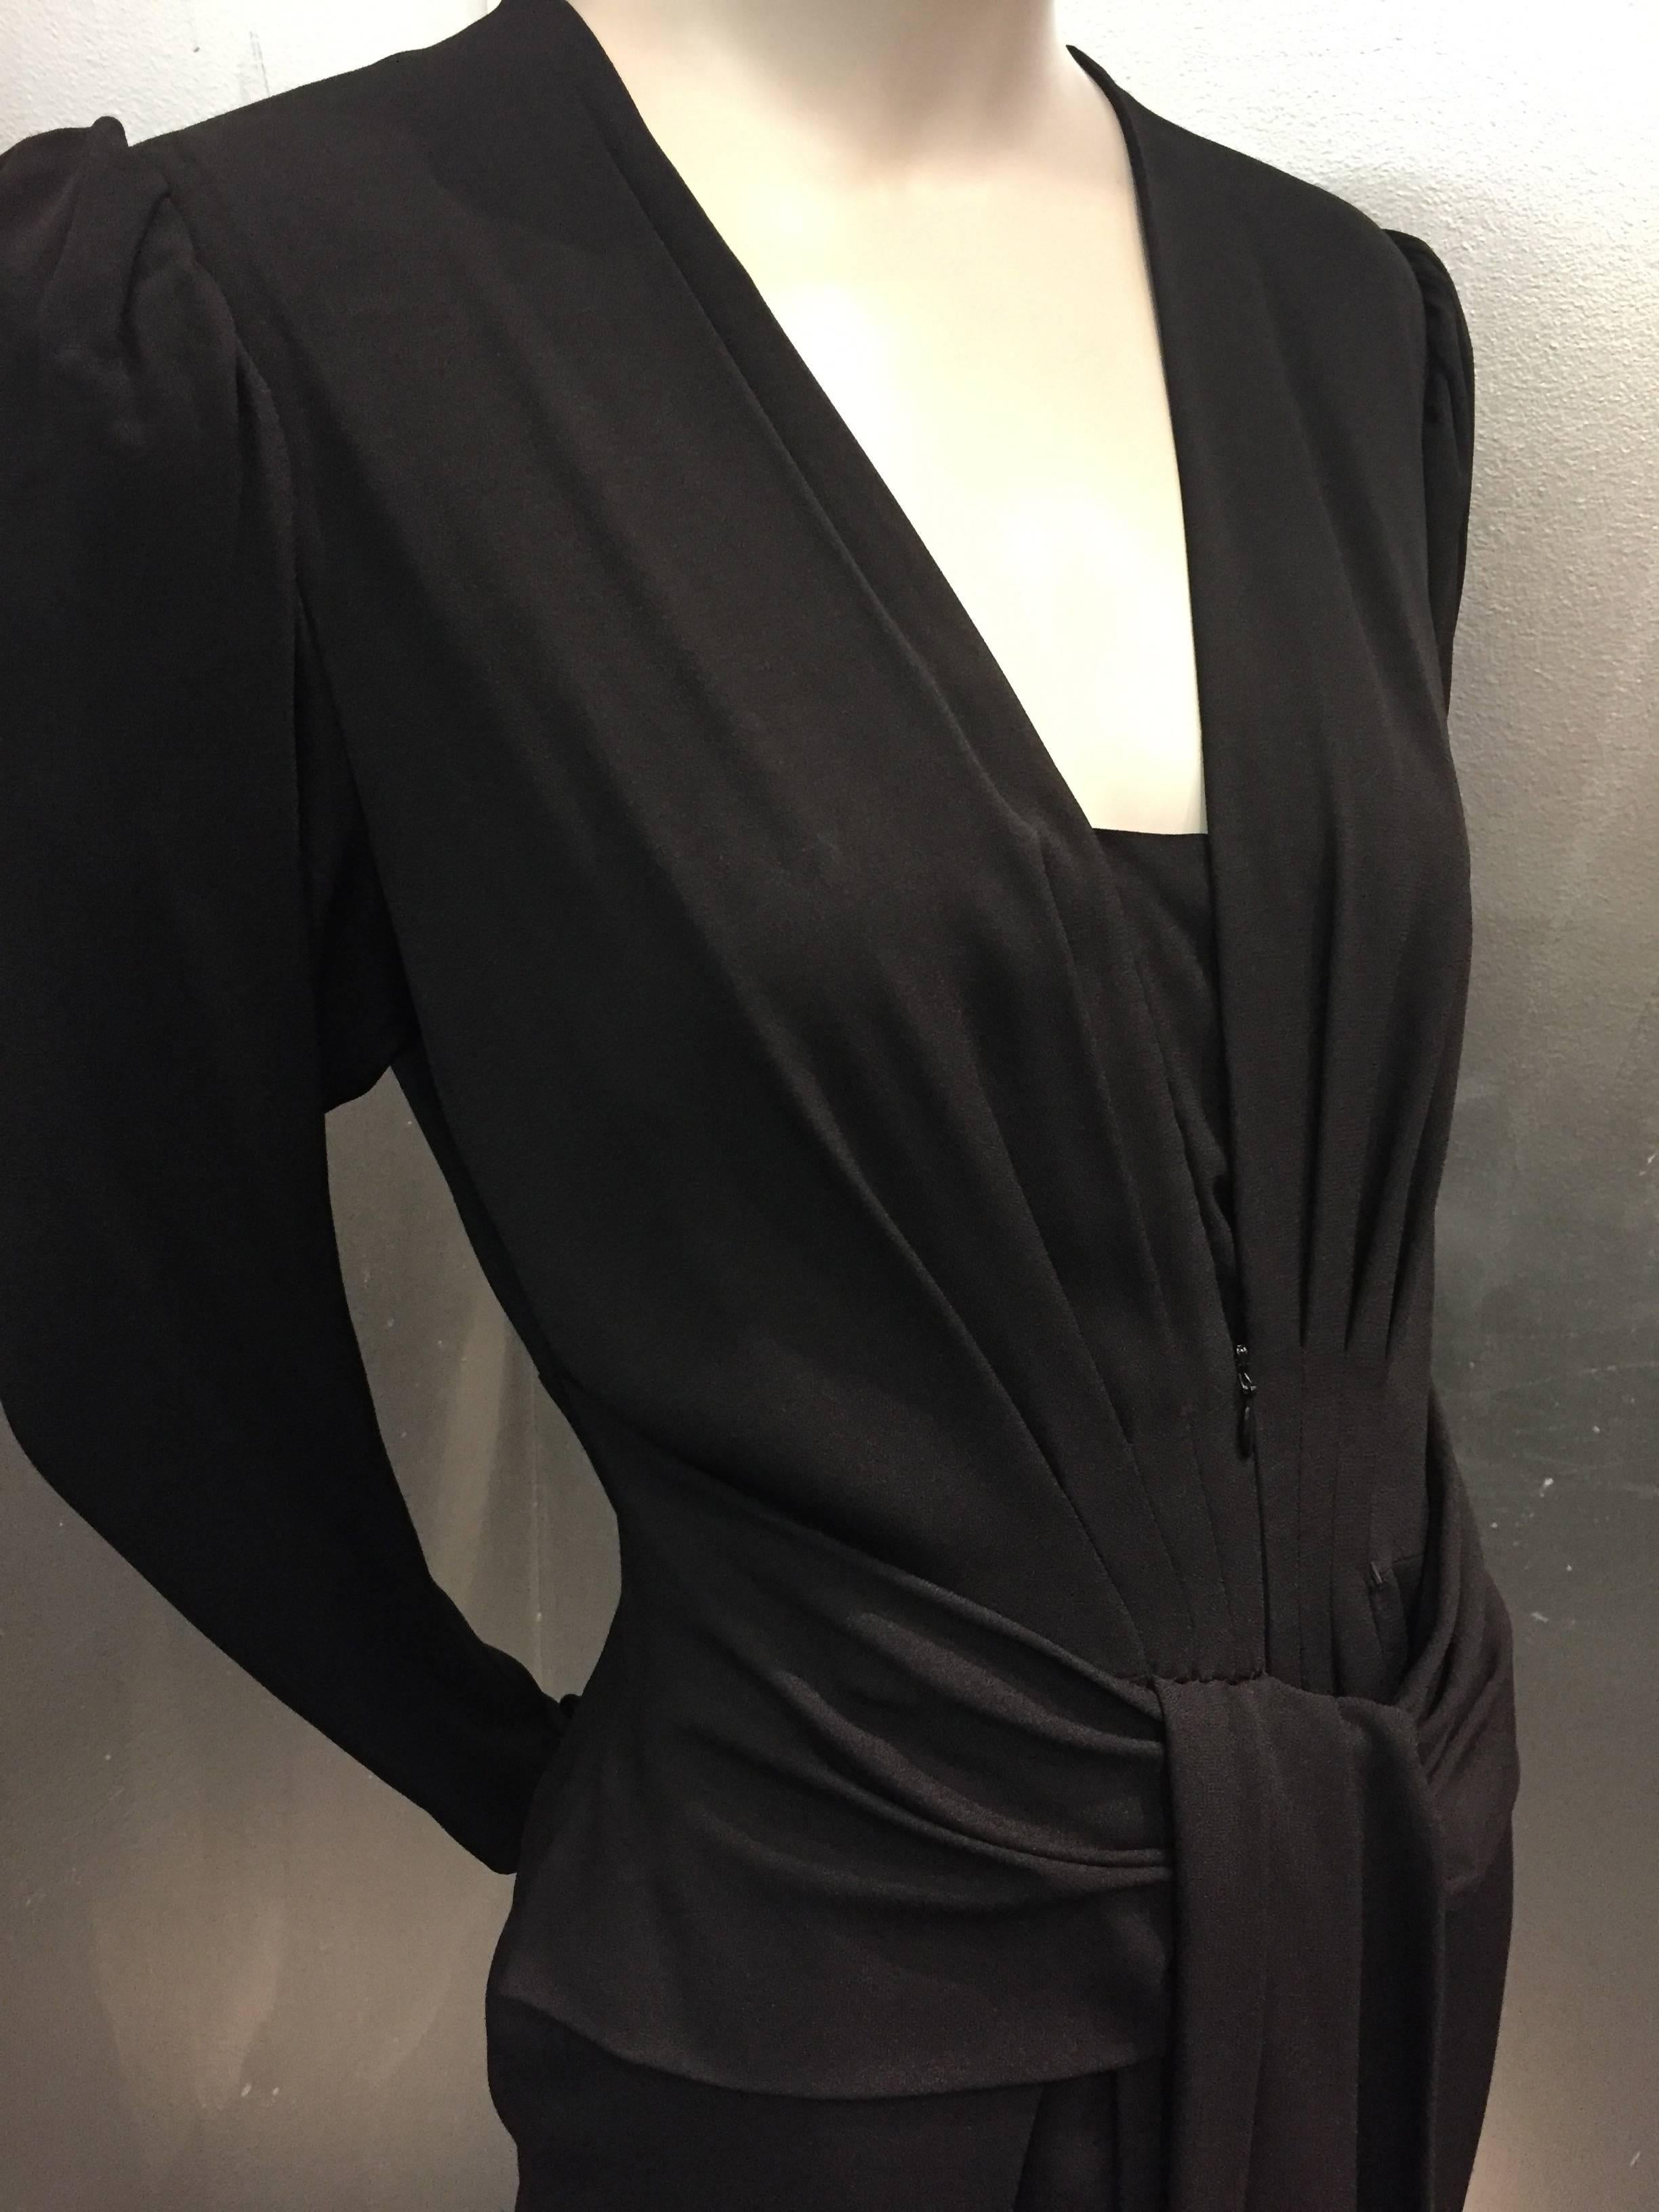 1980s Ted Lapidus Black Crepe Cocktail Dress w/ 1940s-Inspired Style 4